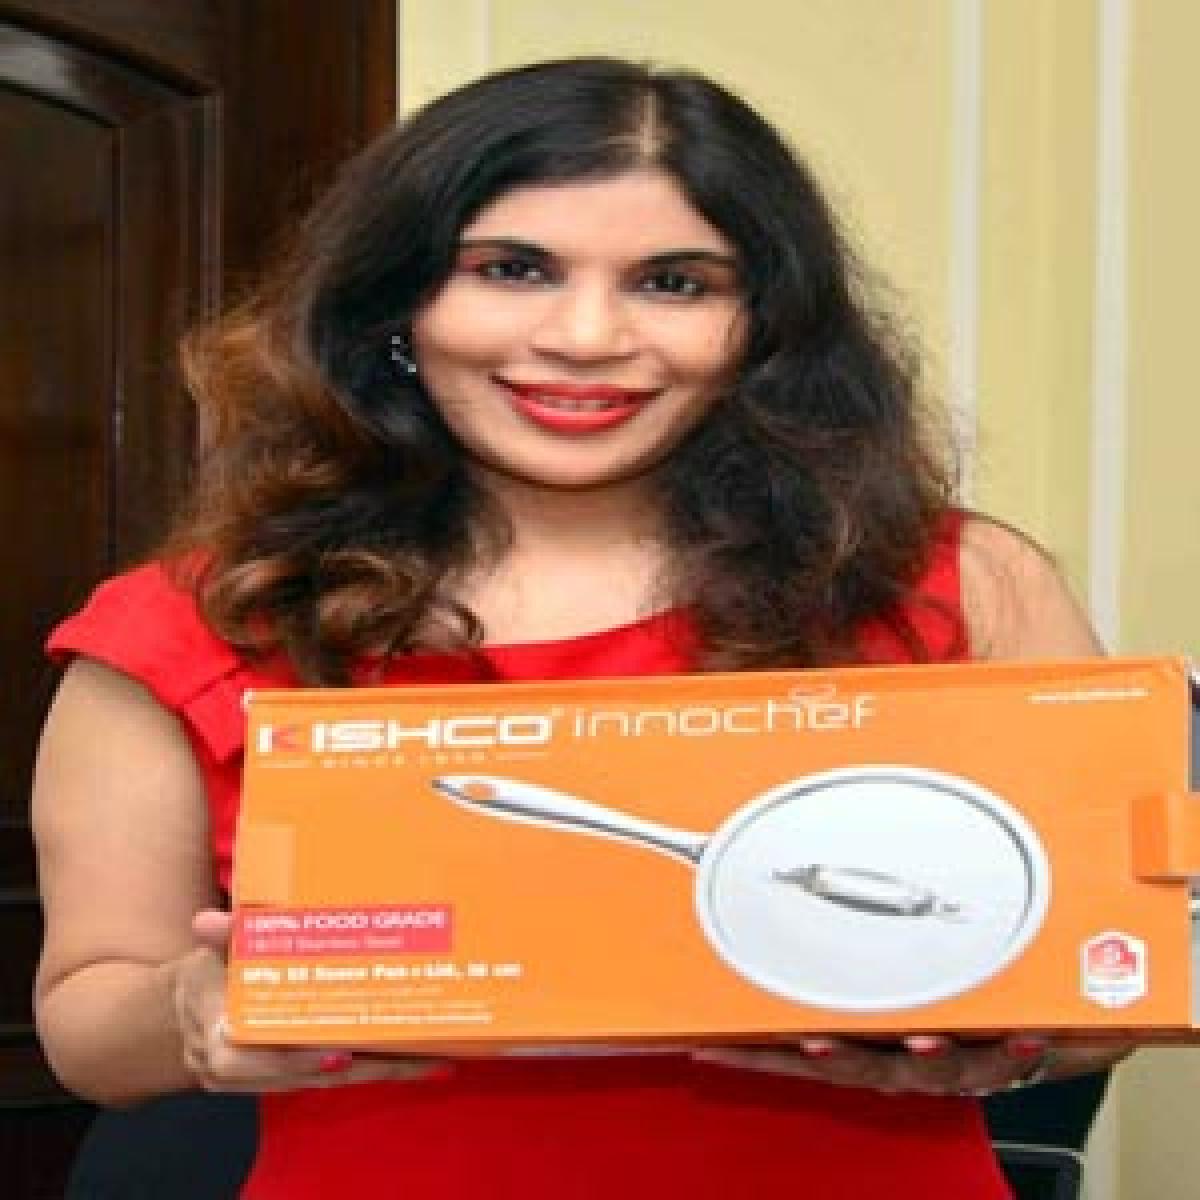 Kishco launches cookware in Telangana State